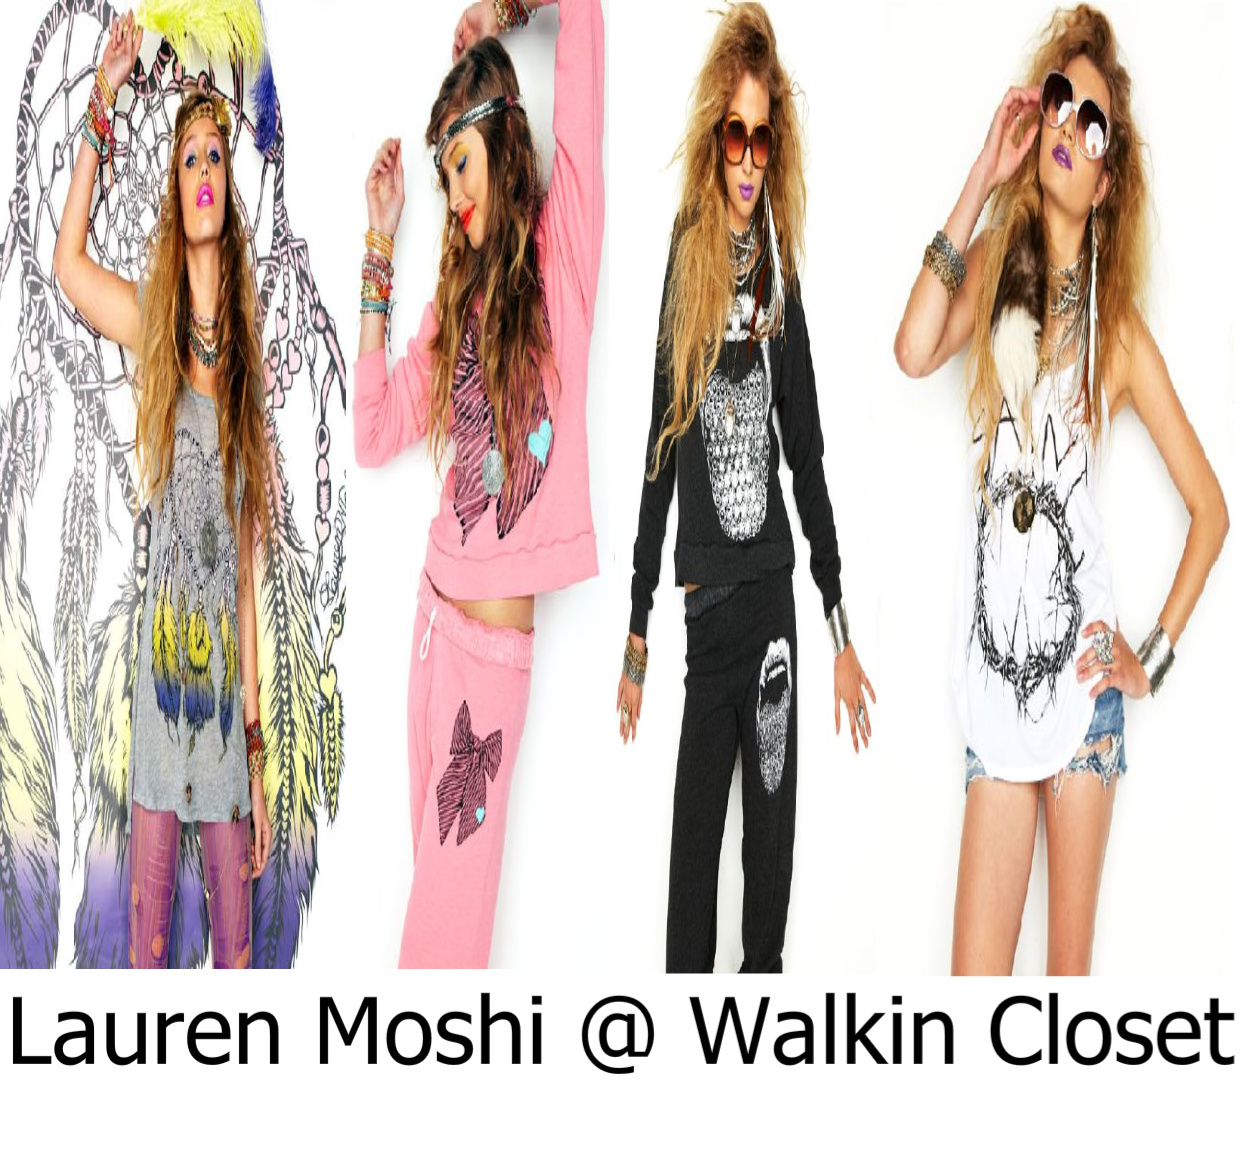 Check whats new from Lauren Moshi!